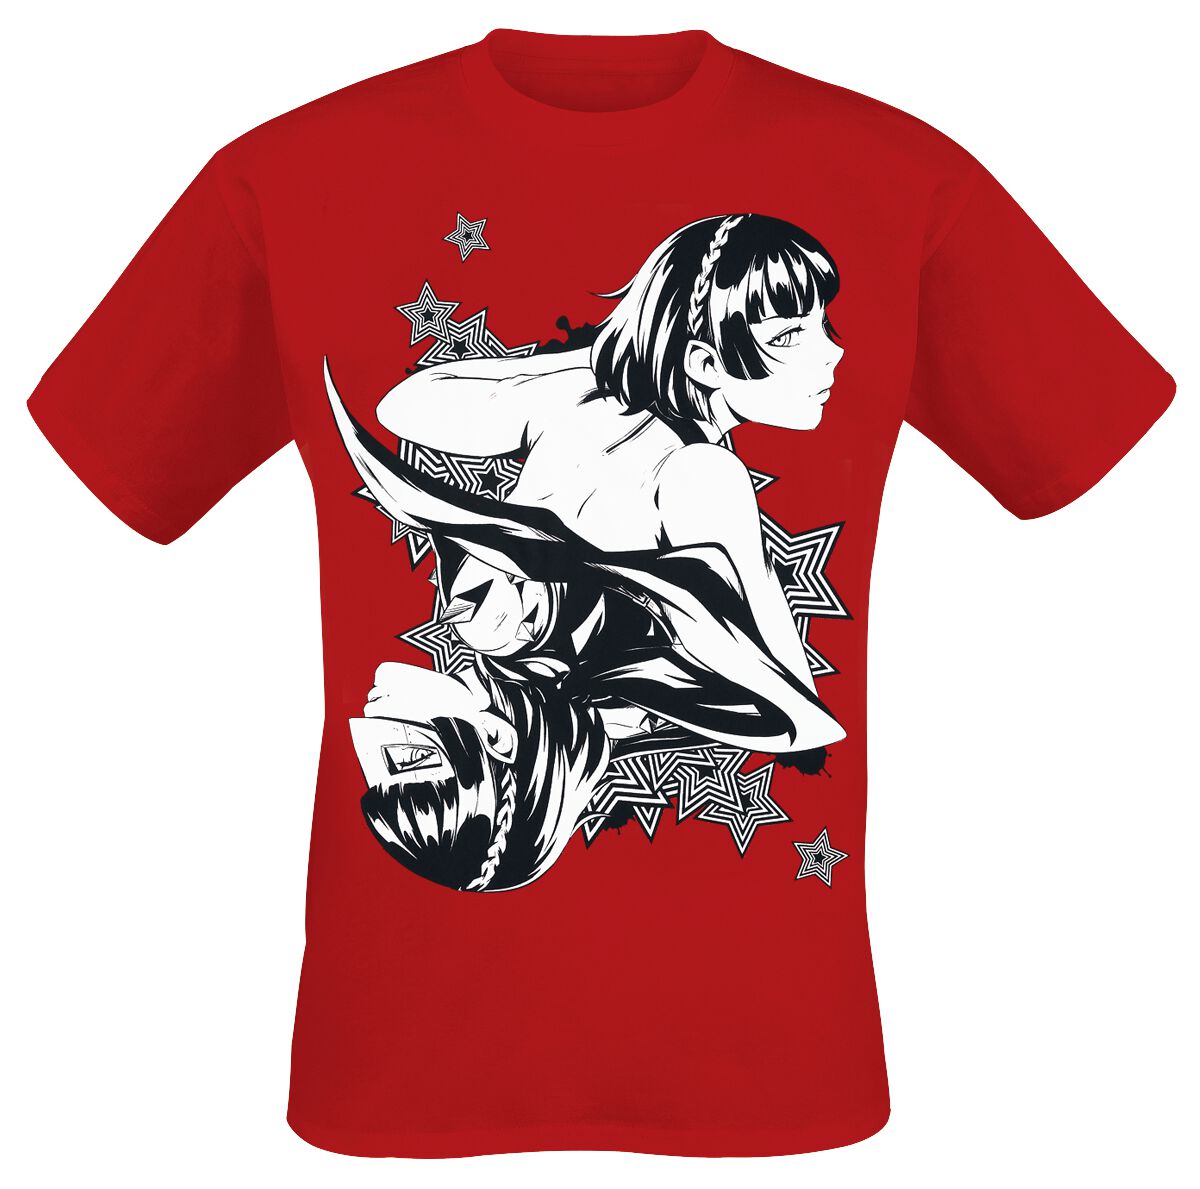 Persona 5 - Makato Playing Card T-Shirt red